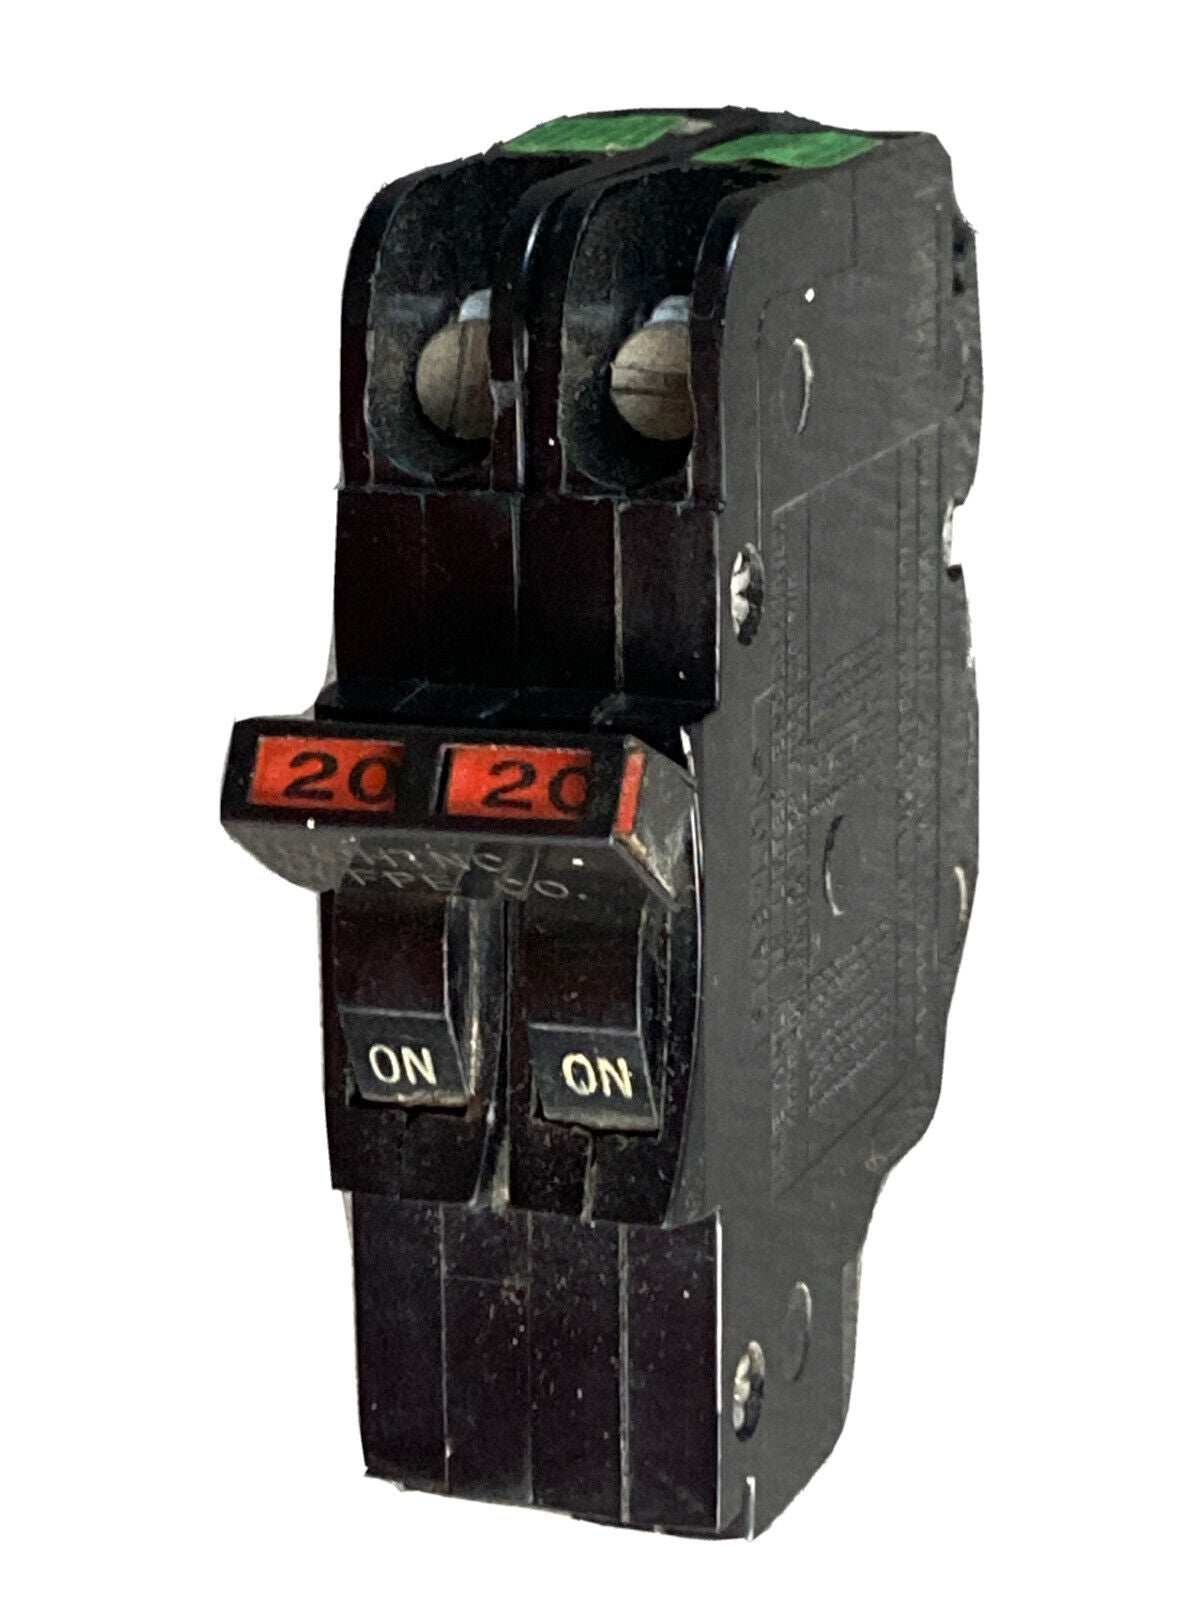 Federal Pacific NC220 2-Pole 20-Amp Circuit Breaker - Re-Certified